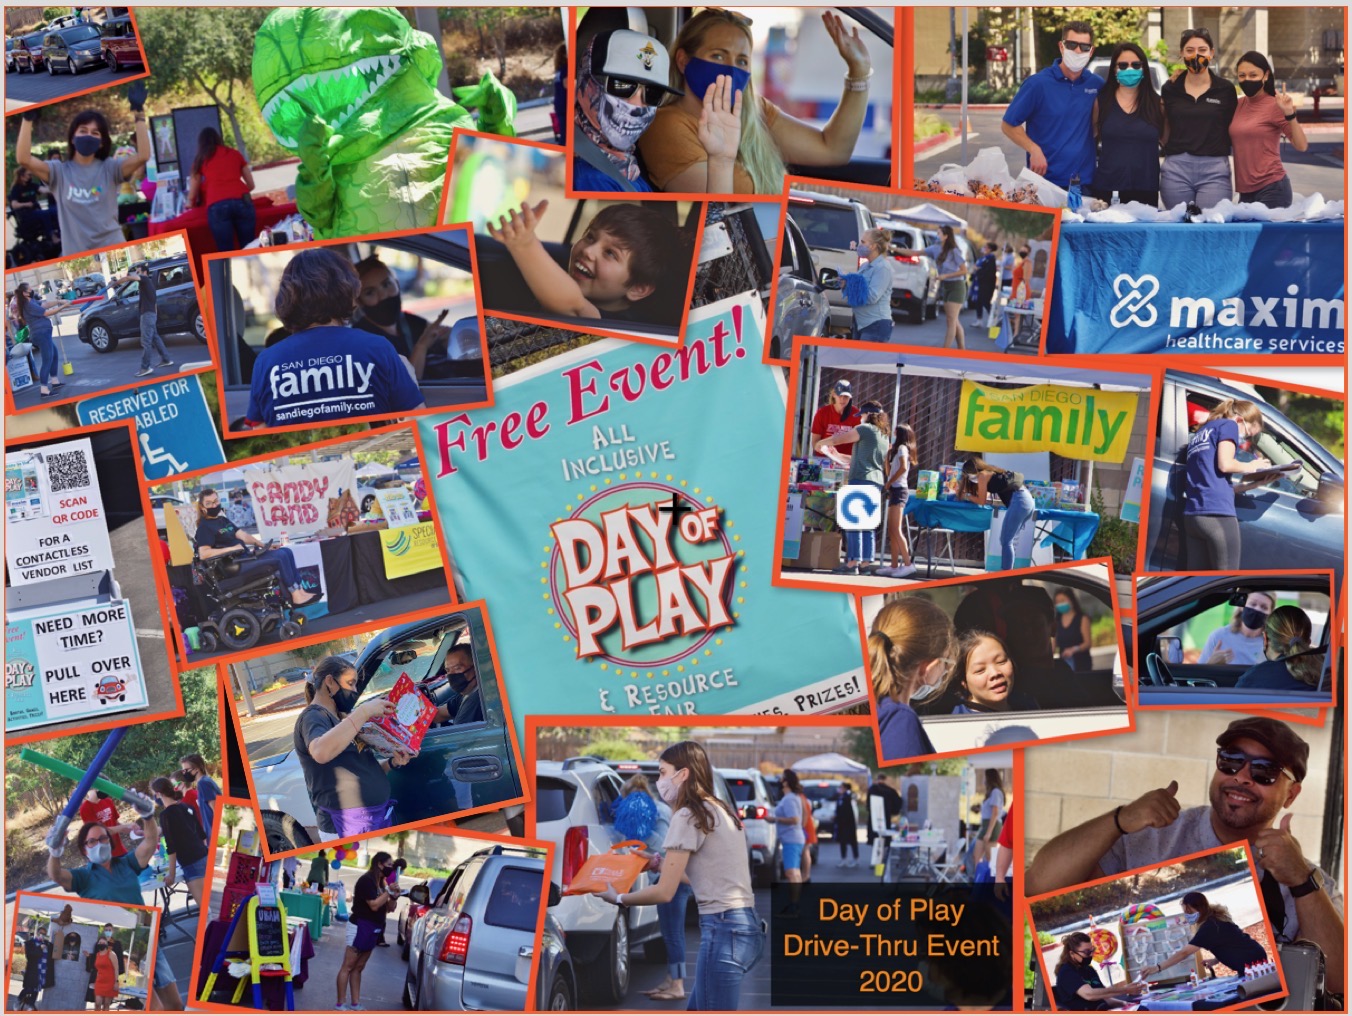 Success at the All Inclusive Day of Play Drive-Thru Event 2020